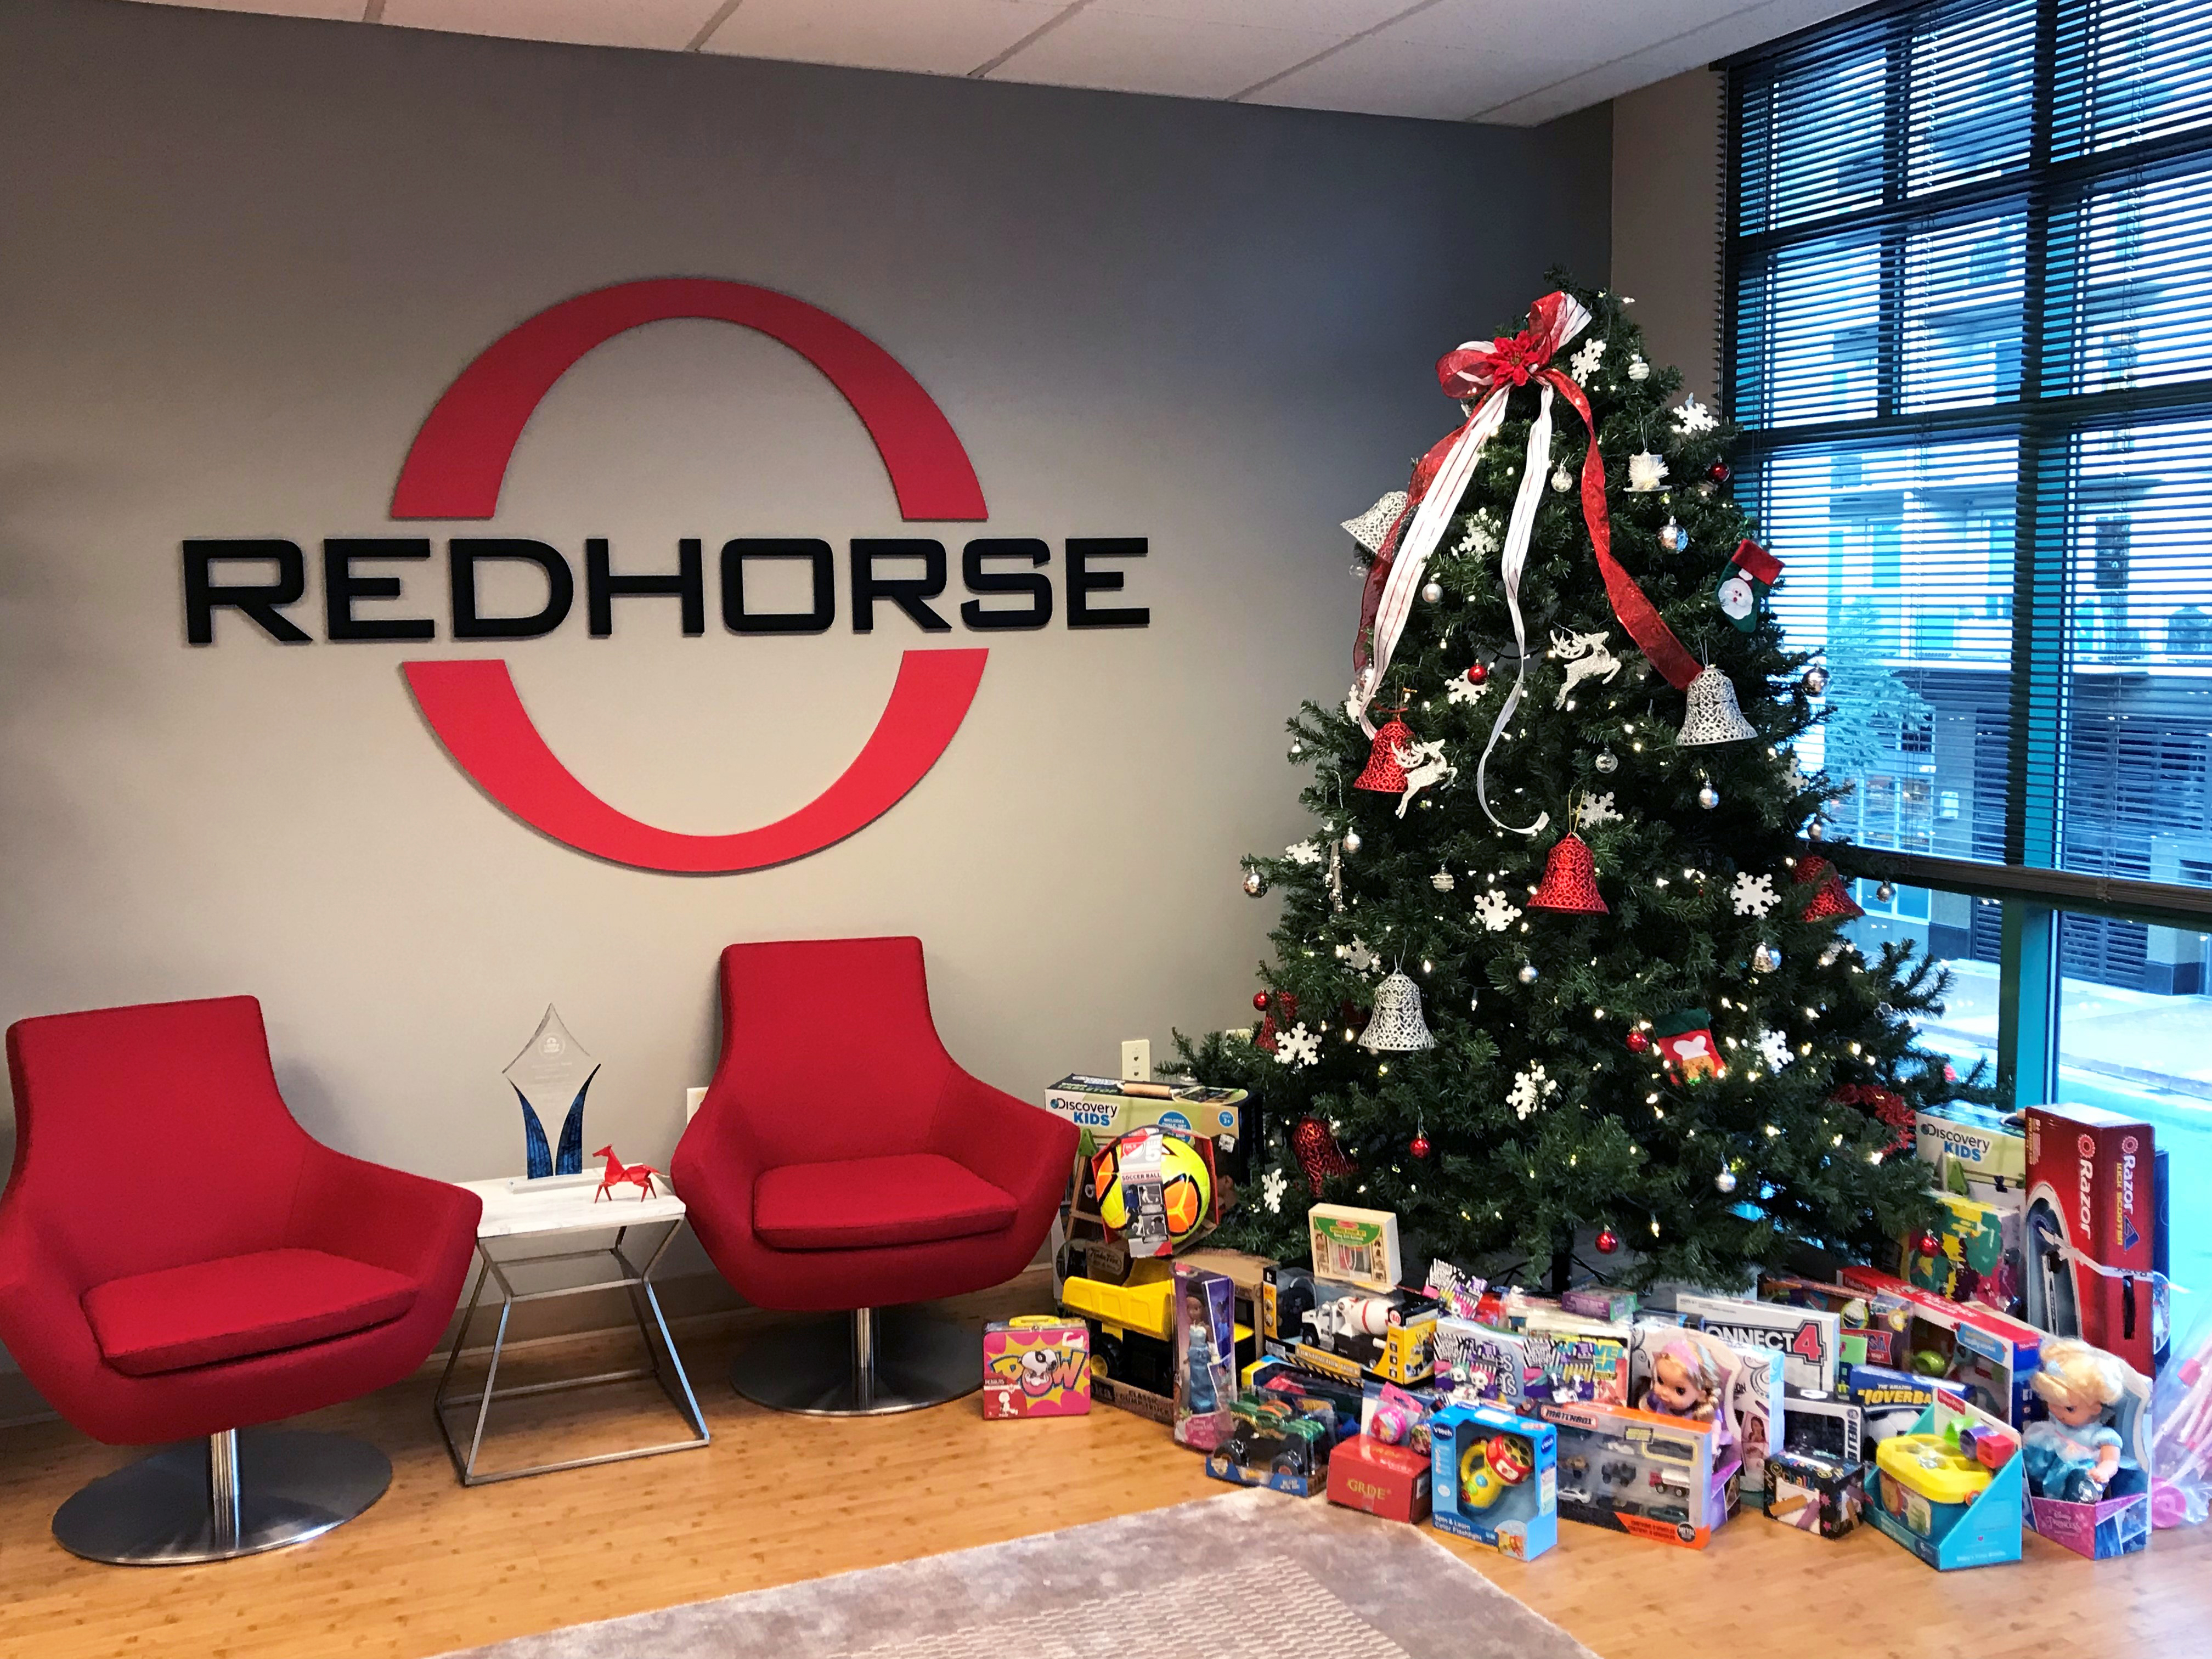 Redhorse Toys For Tots collection, 2017